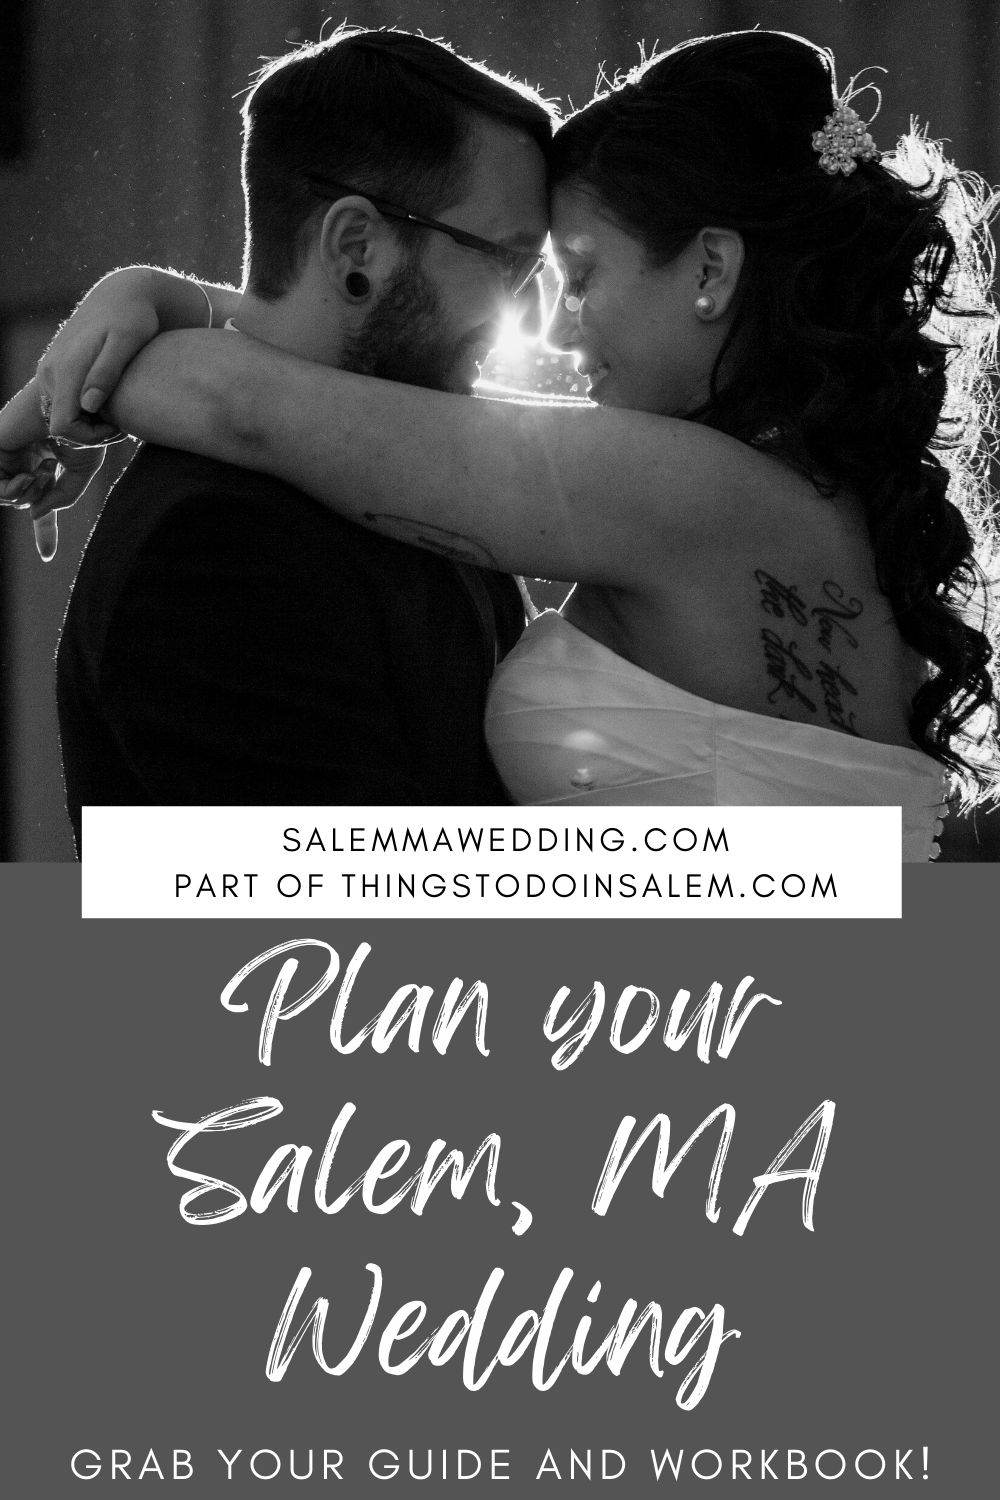 things to do in salem, salem ma wedding, witch city wedding the guide